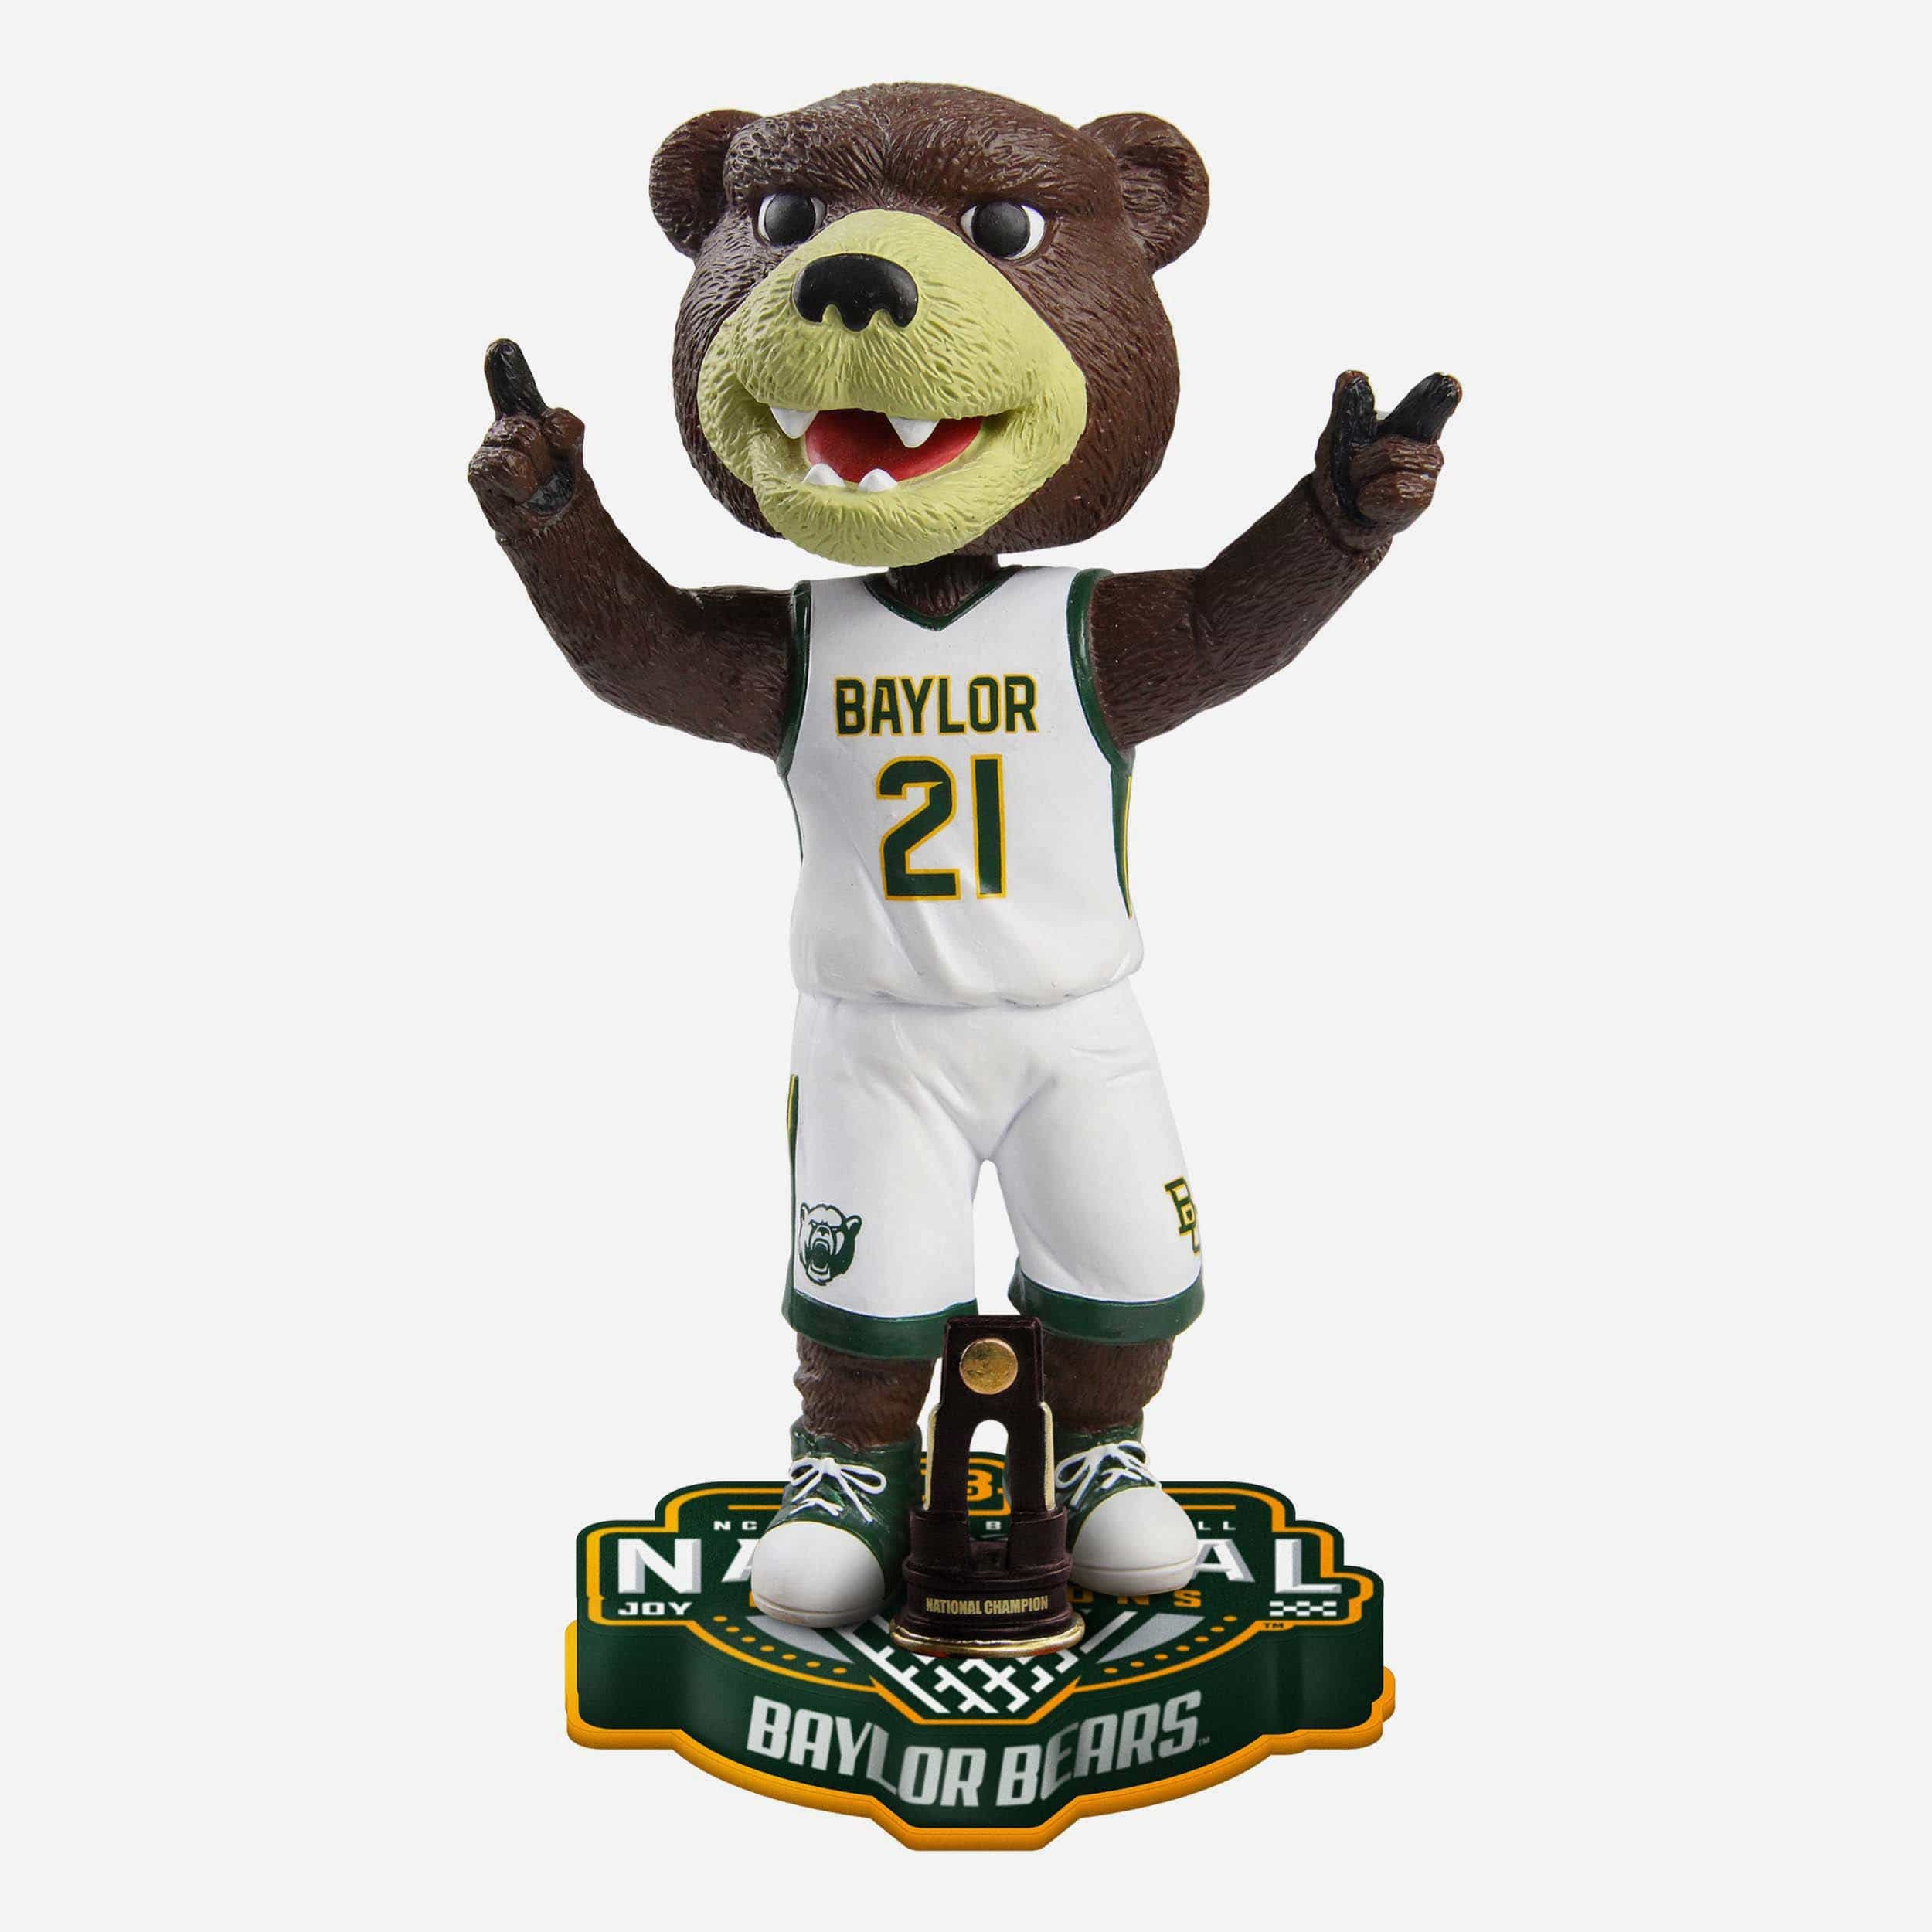 Custom College Basketball Jerseys Baylor Bear Jersey March Madness Final Four Name and Number Green